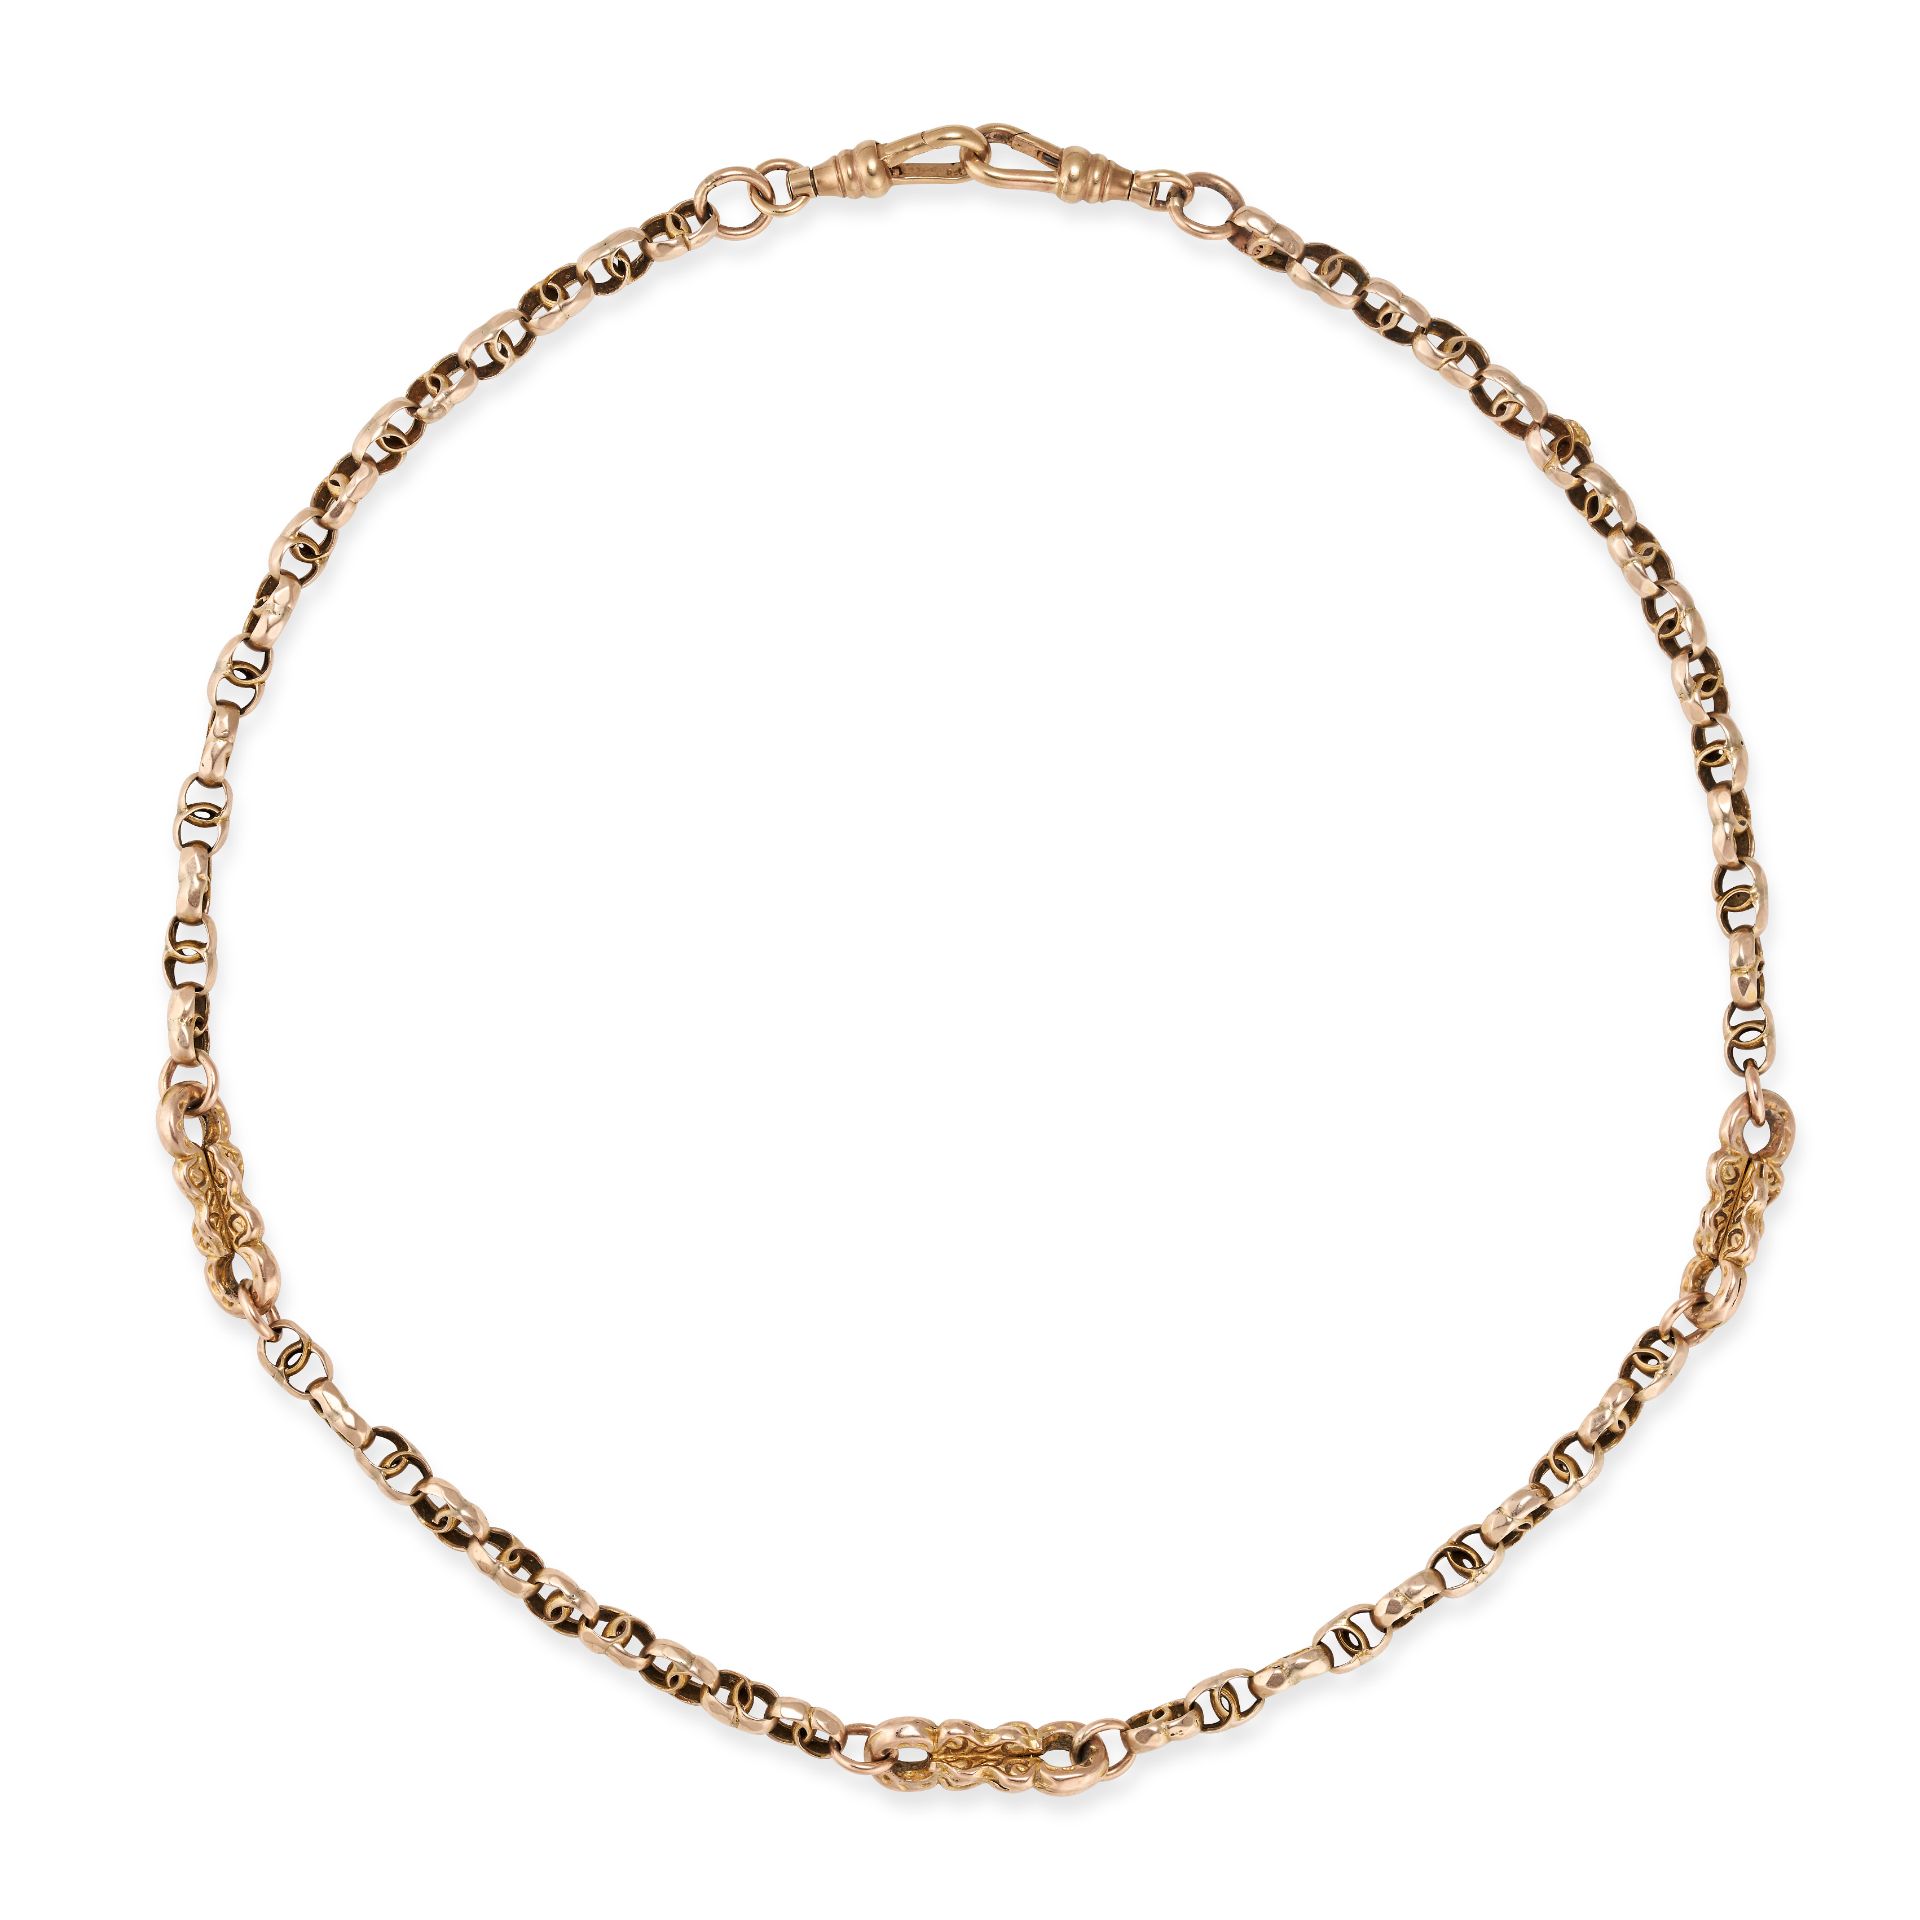 NO RESERVE - A VINTAGE ALBERT CHAIN in 9ct yellow gold, comprising a row of fancy links terminati...